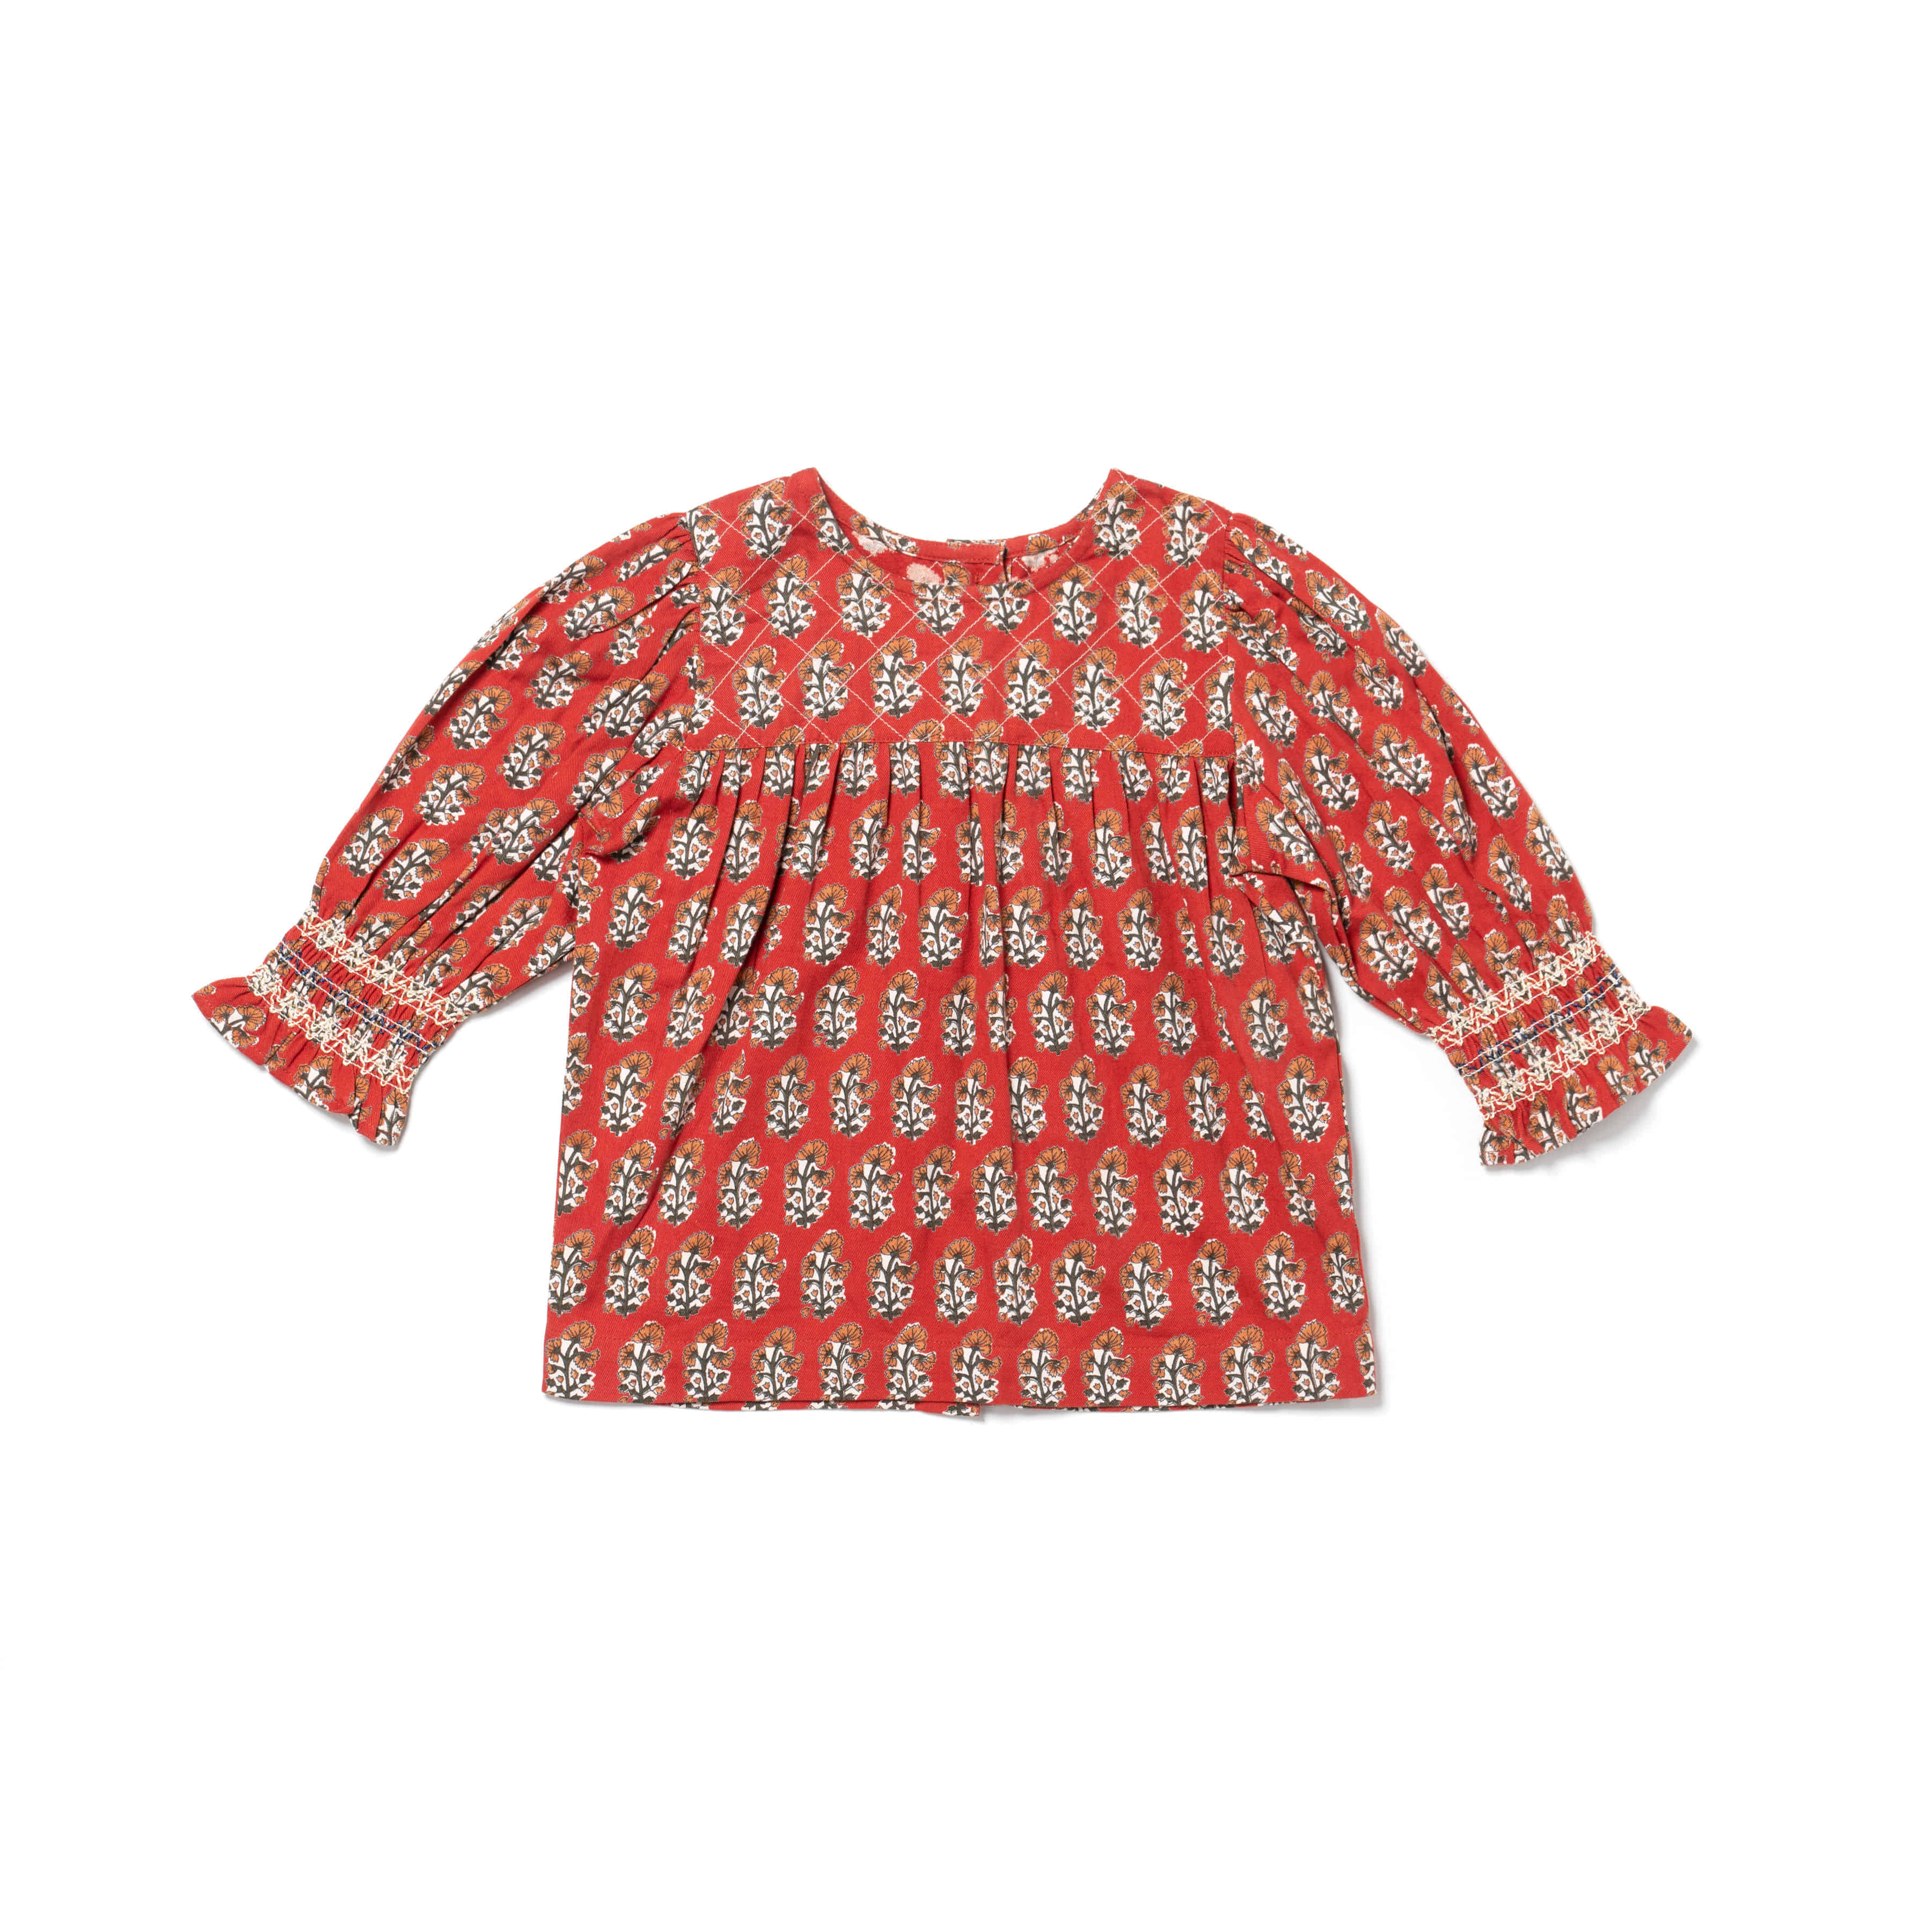 [LALi kids/라리키즈] QUILTED SUNFLOWER TOP-RED BLOCK PRINT